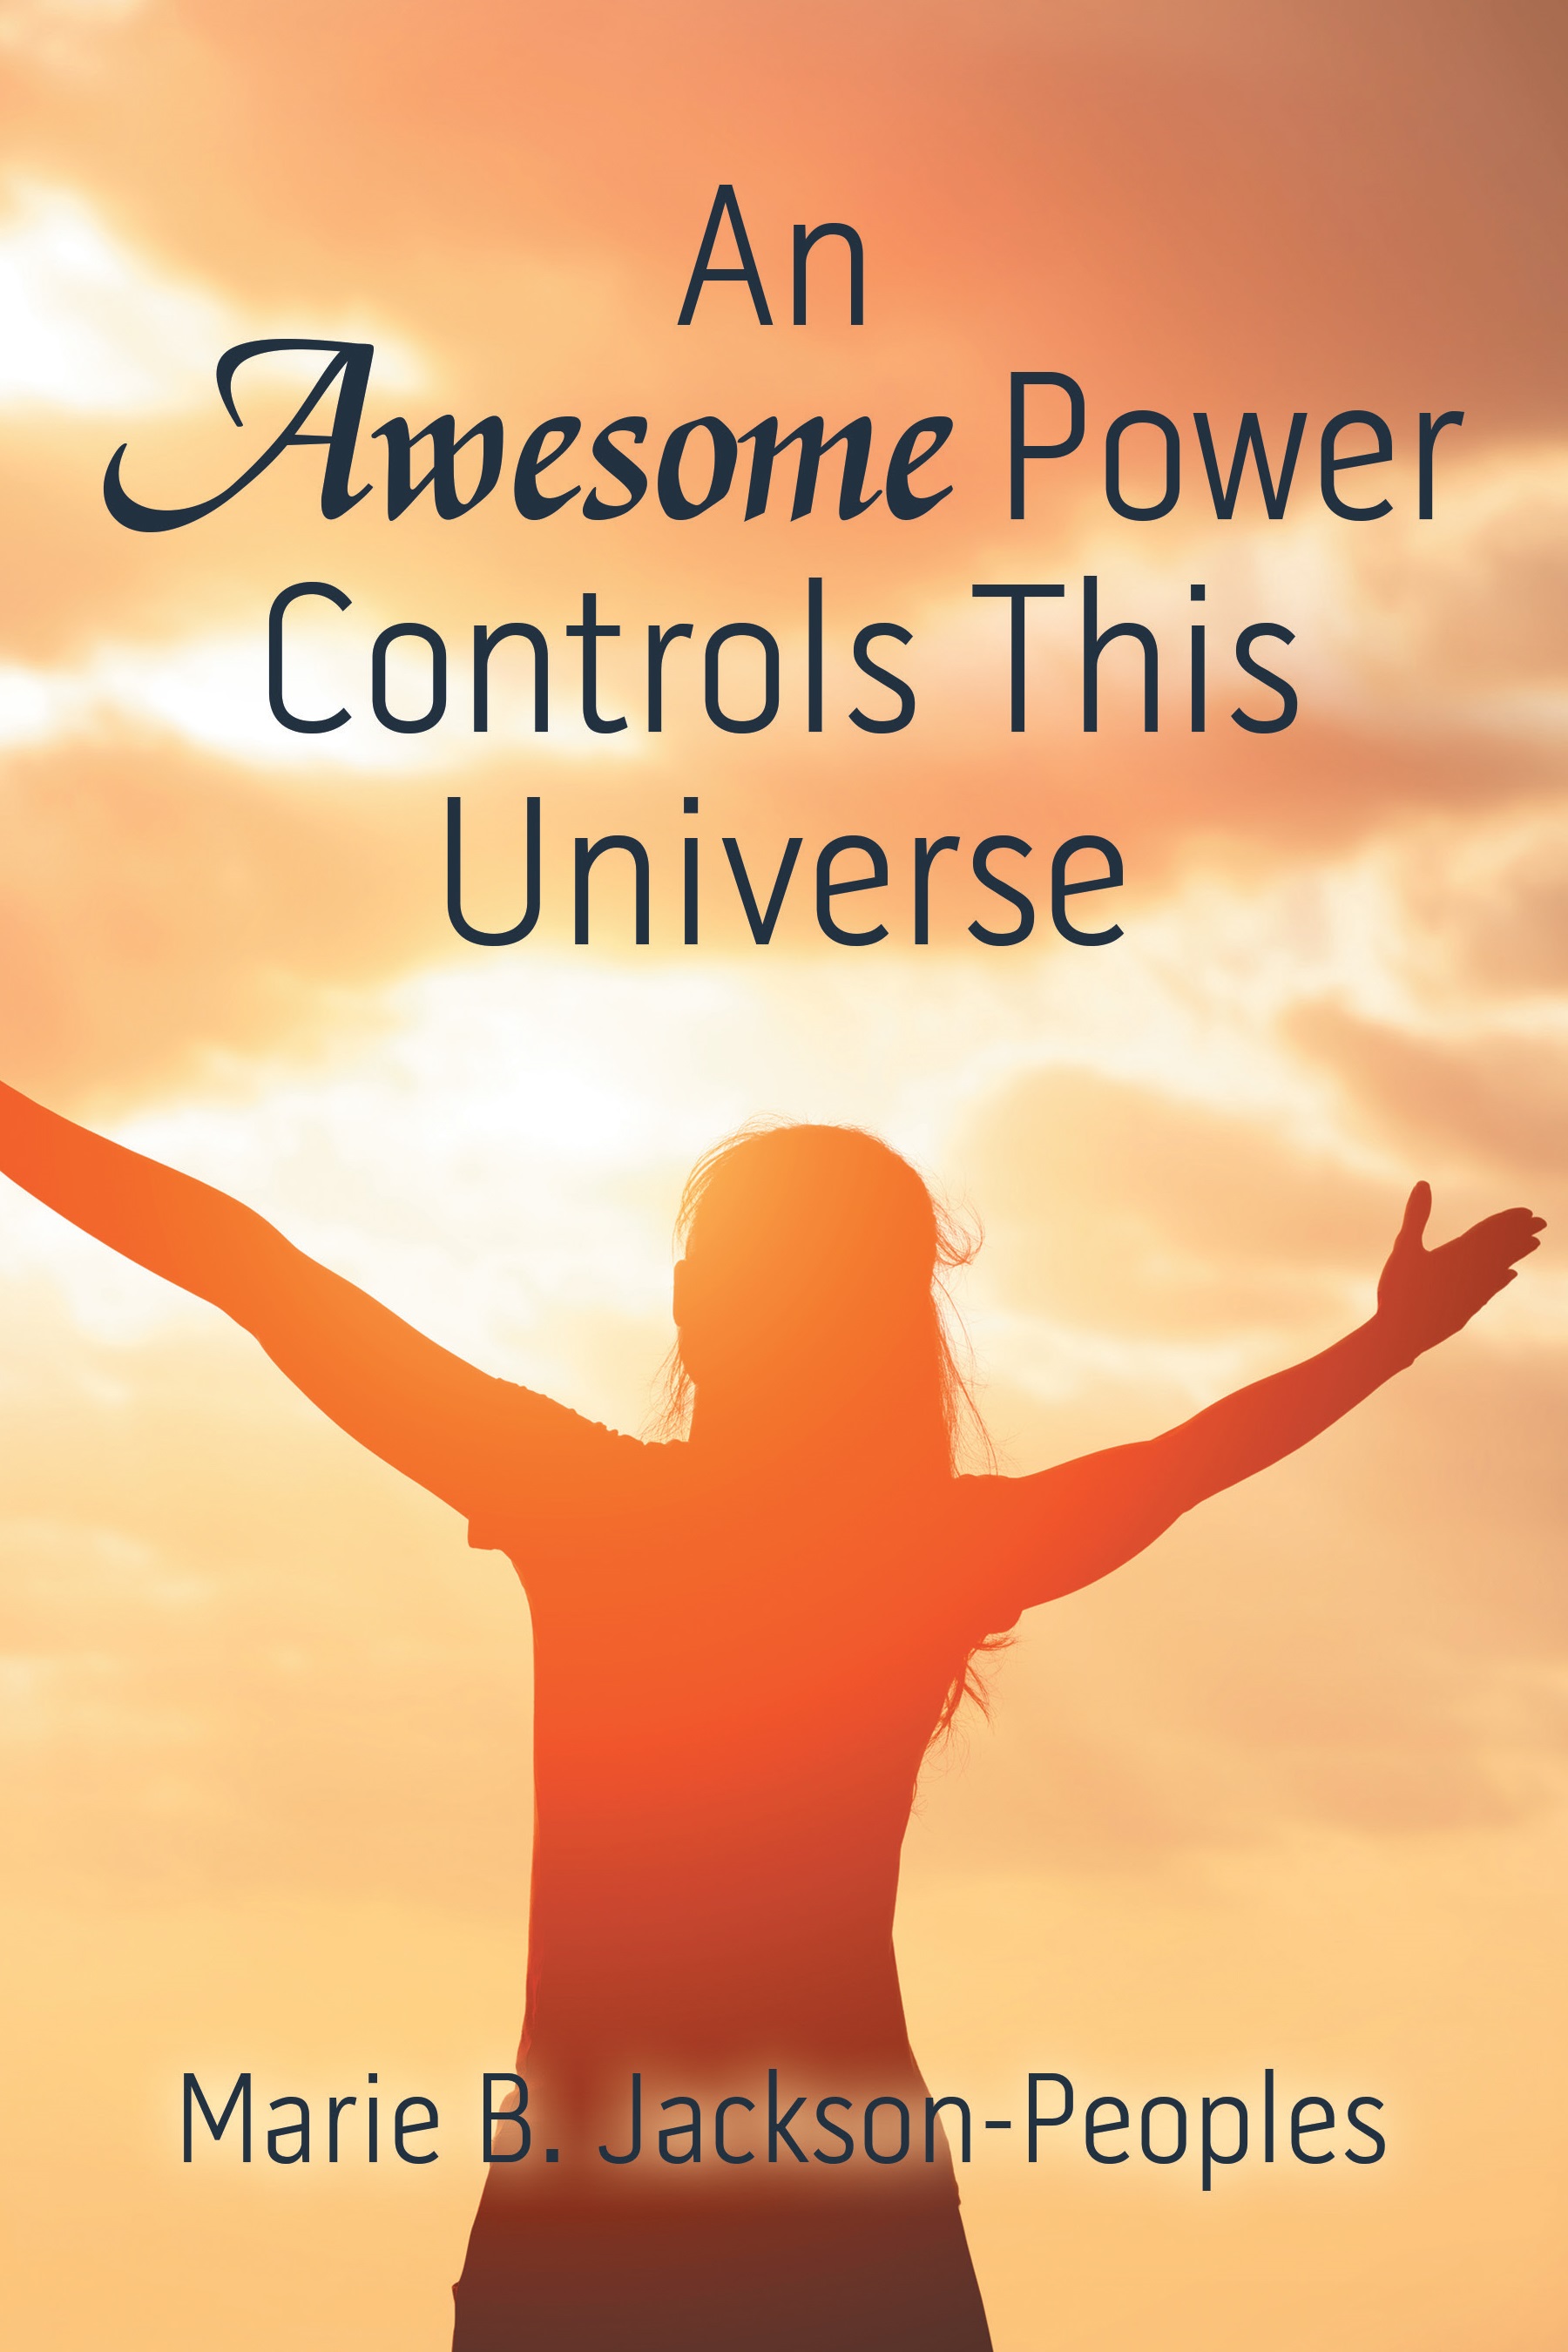 An Awesome Power Controls This Universe